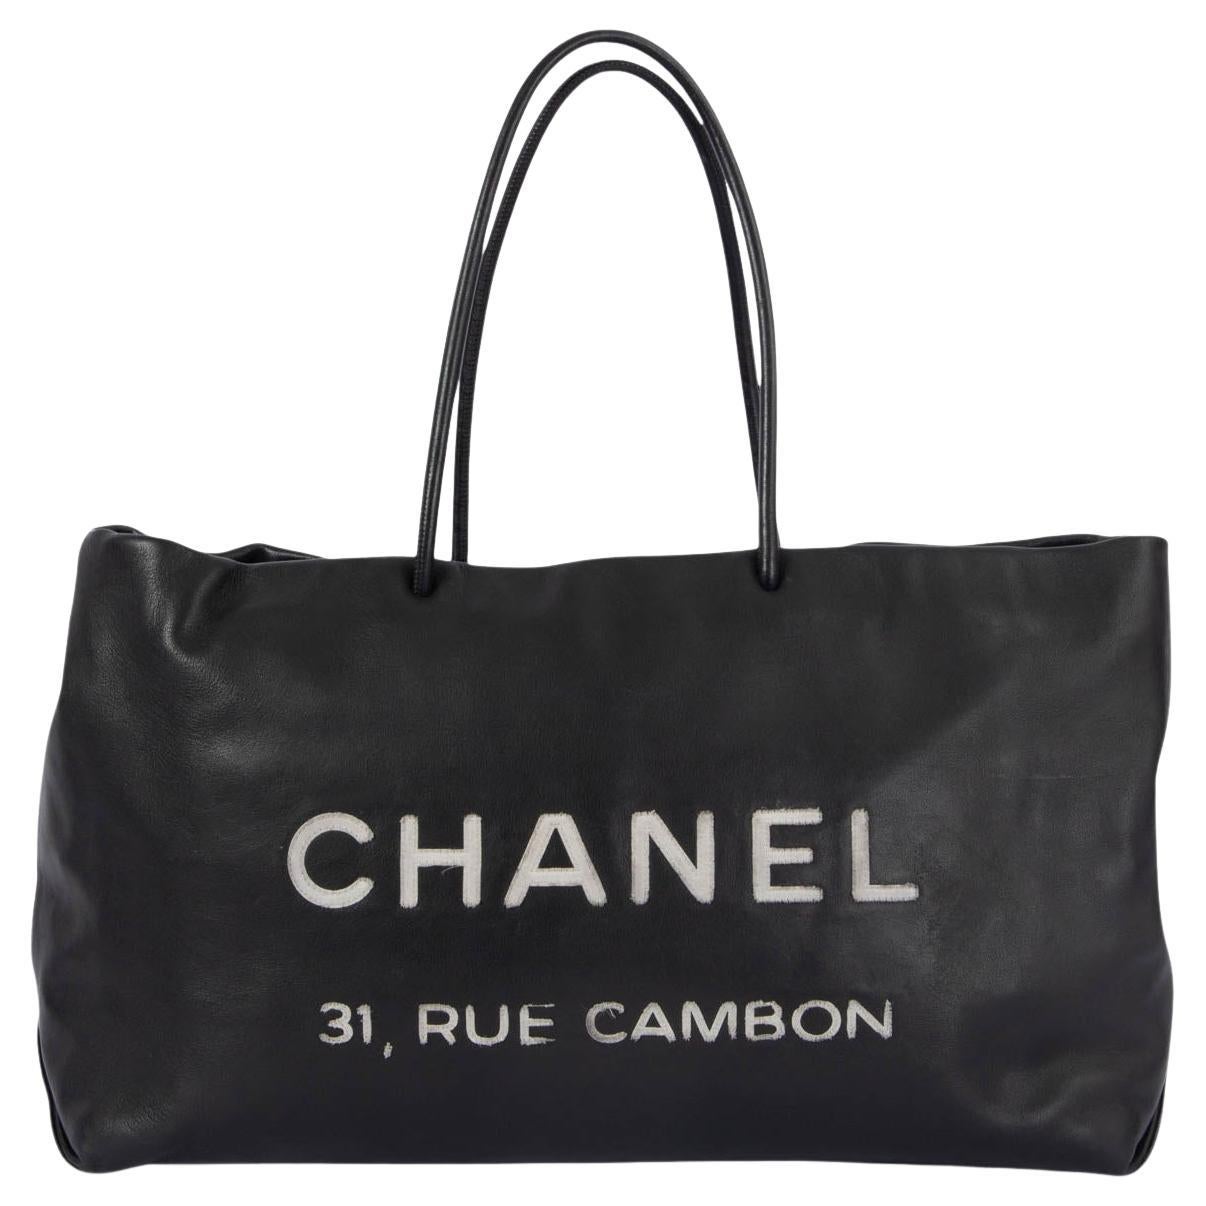 CHANEL black leather ESSENTIAL LARGE 31, RUE CAMBON Tote Bag For Sale